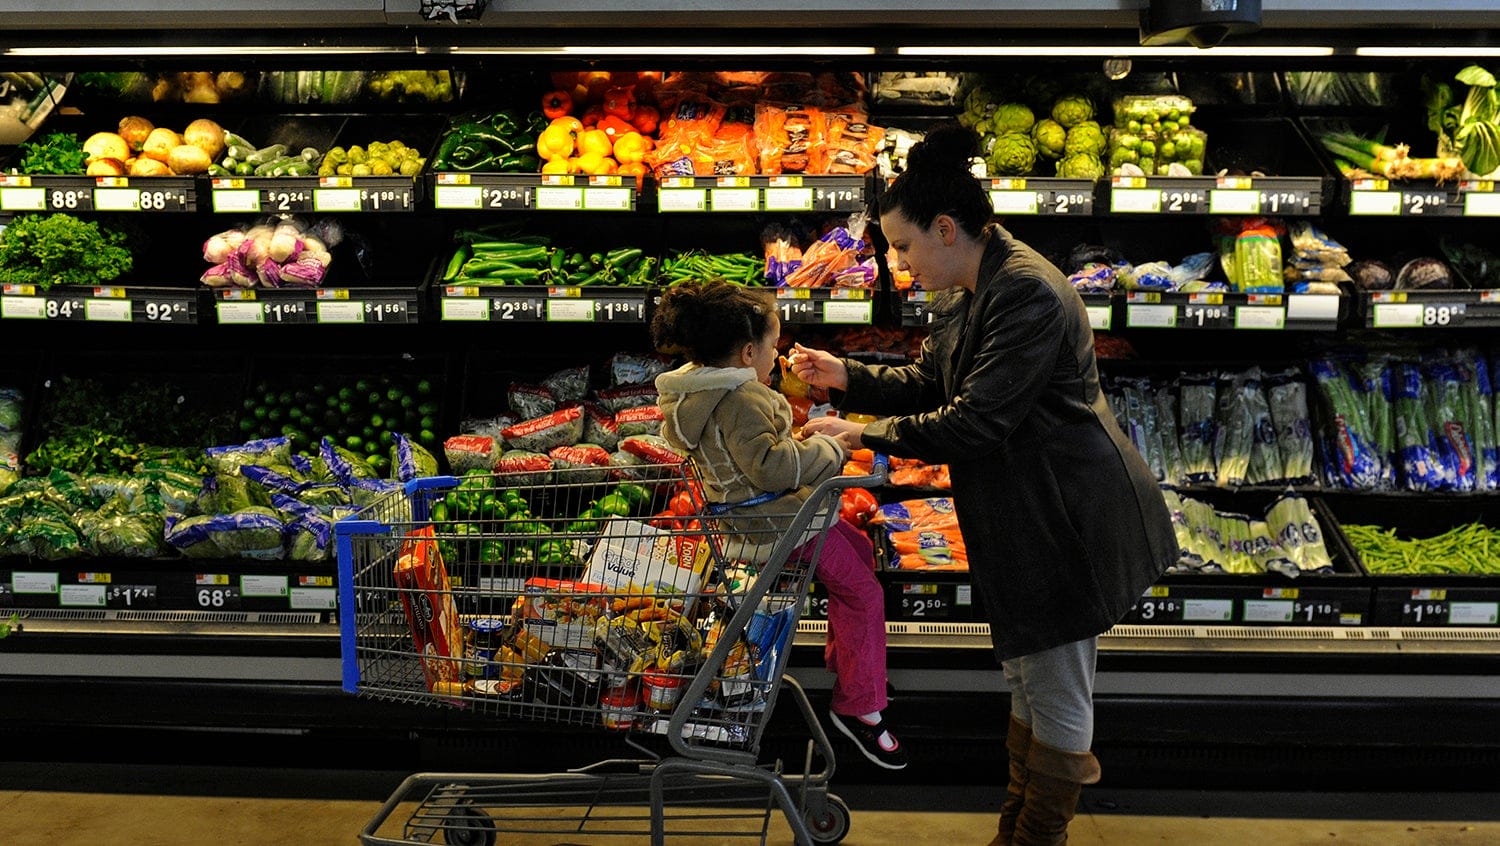 Parent talking to child seated in shopping cart